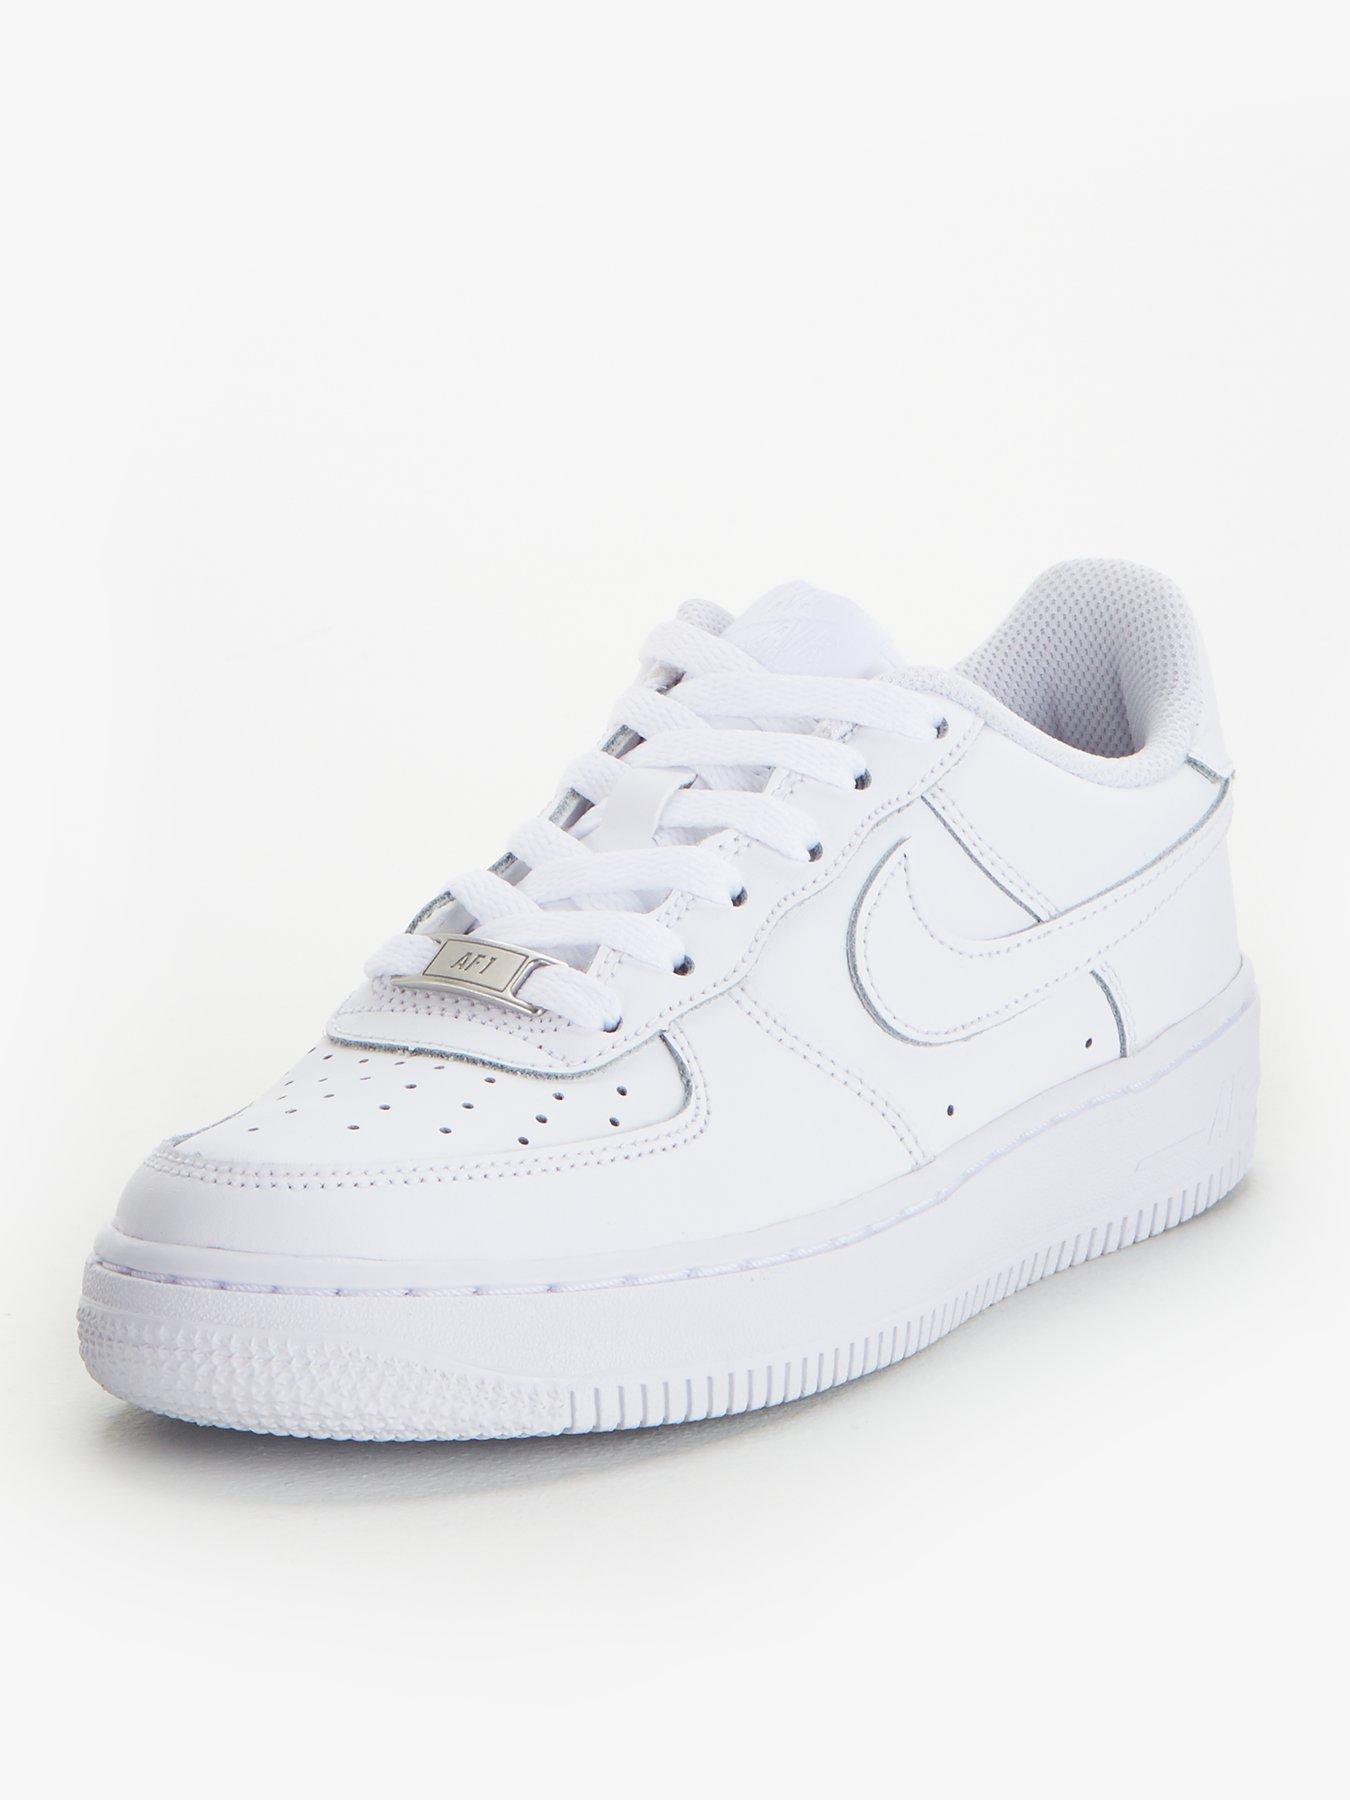 white nike air force junior size 5